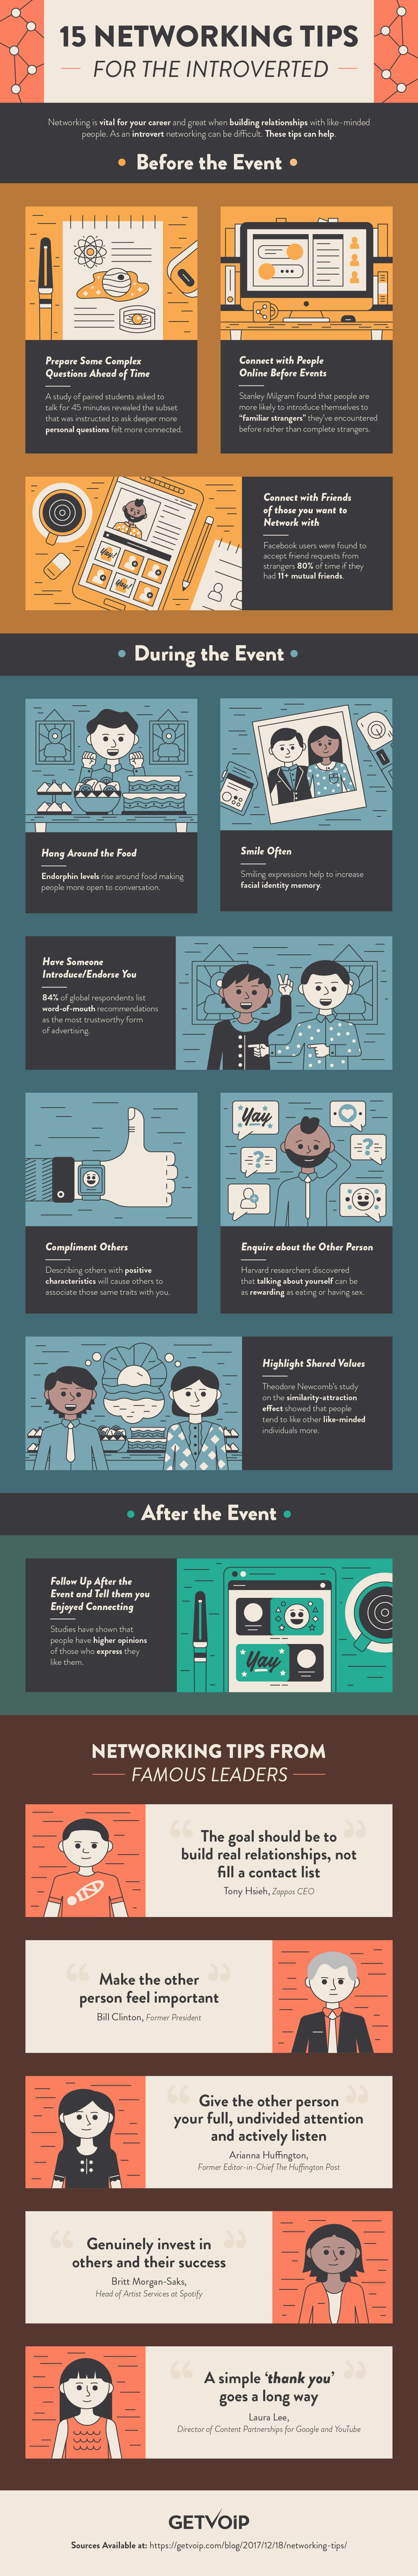 Networking tips for introverted professionals infographic